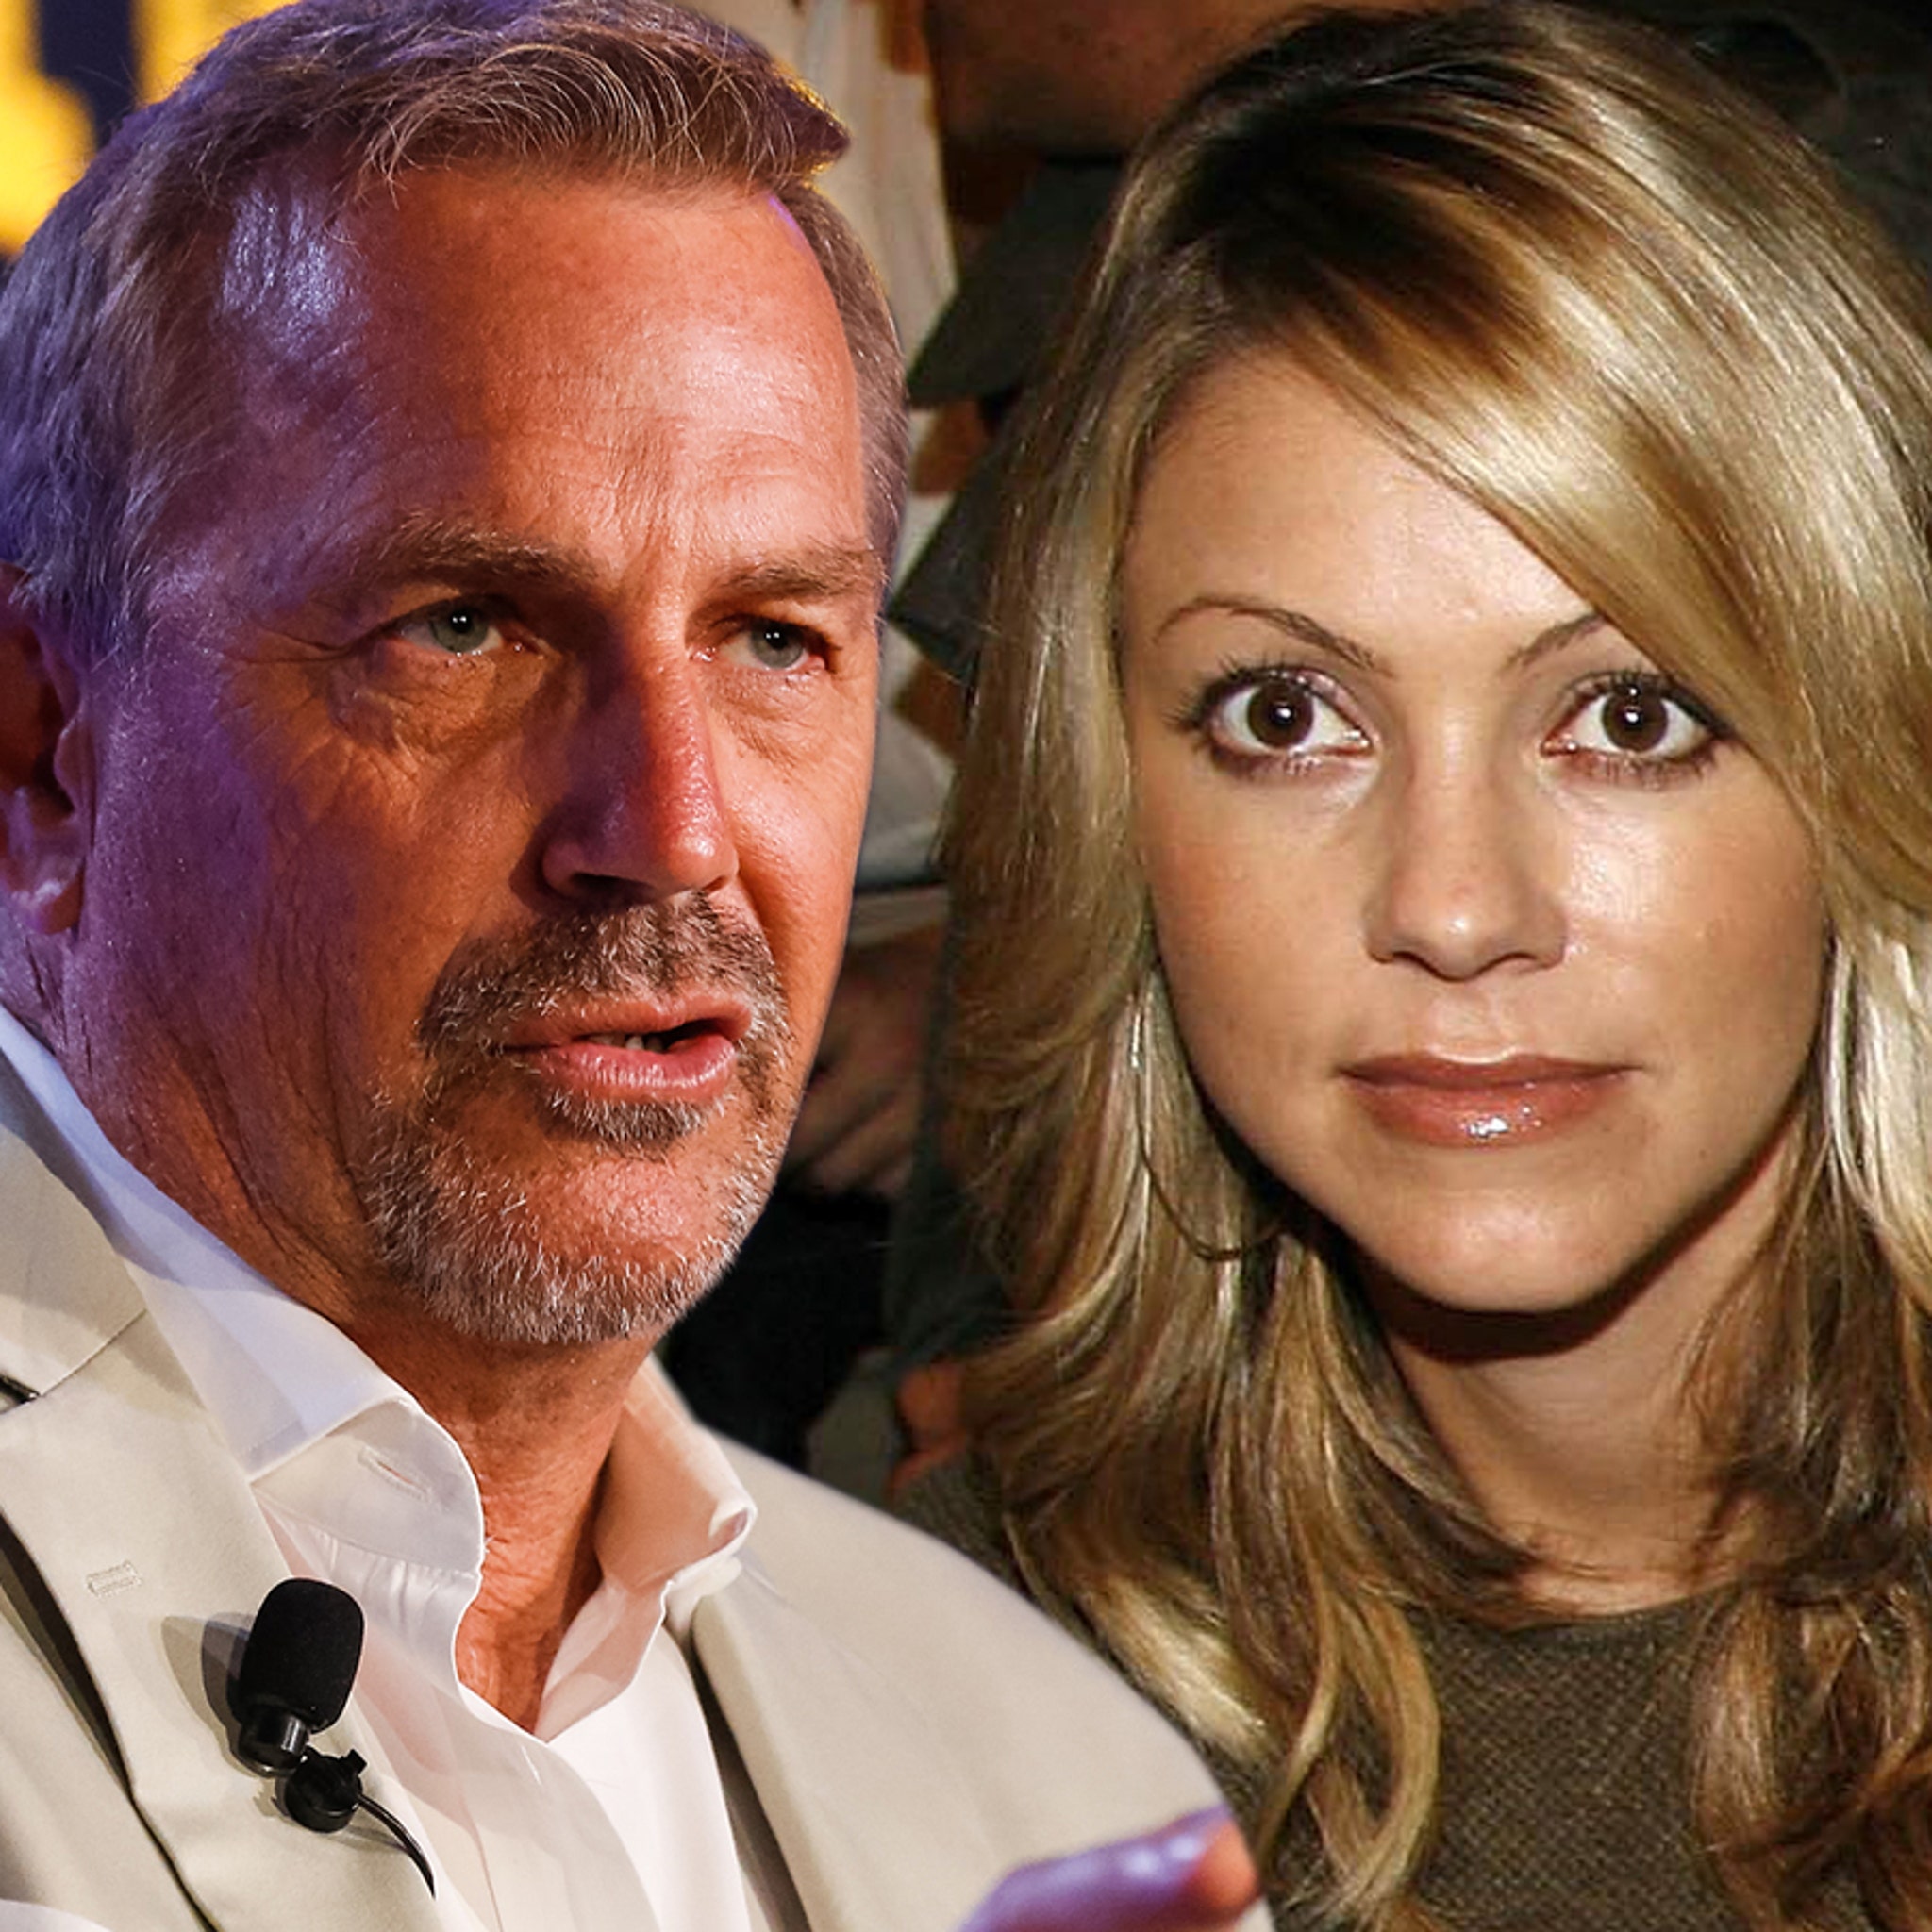 Kevin Costner Wins, Ordered To Pay Estranged Wife $63K In Child Support